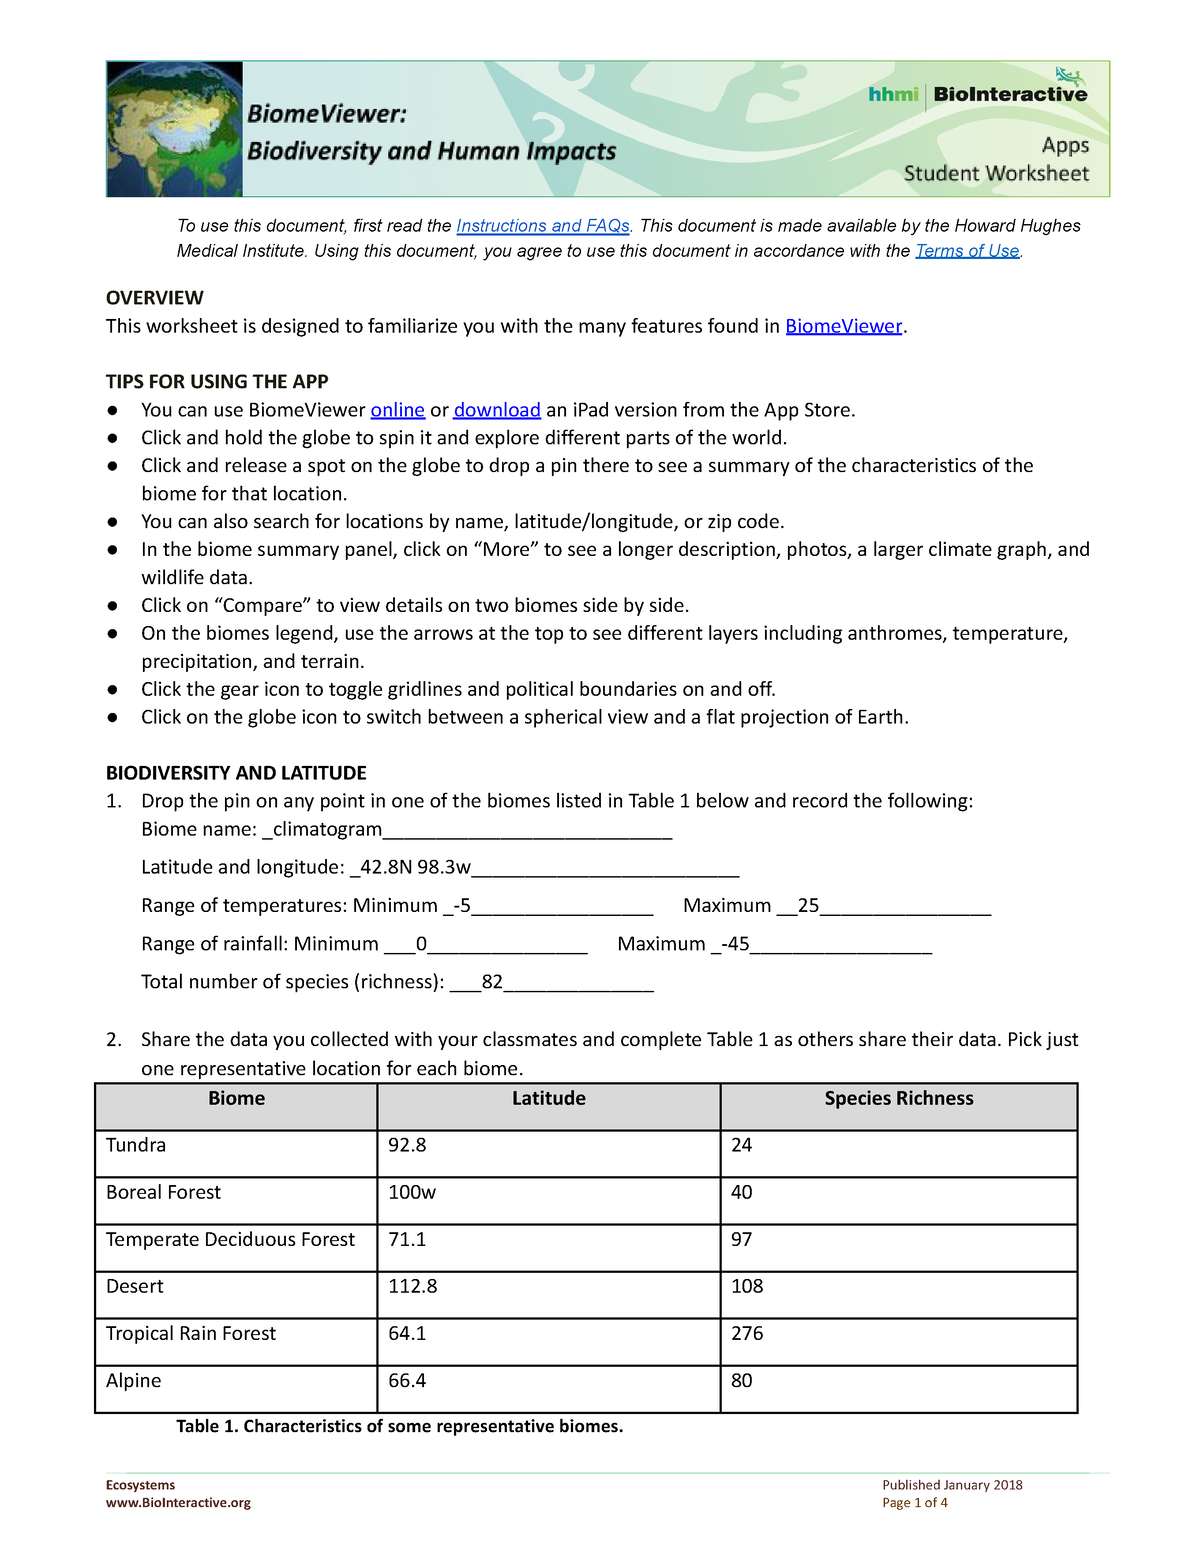 Copy of Student Worksheet - To use this document, first read the ...